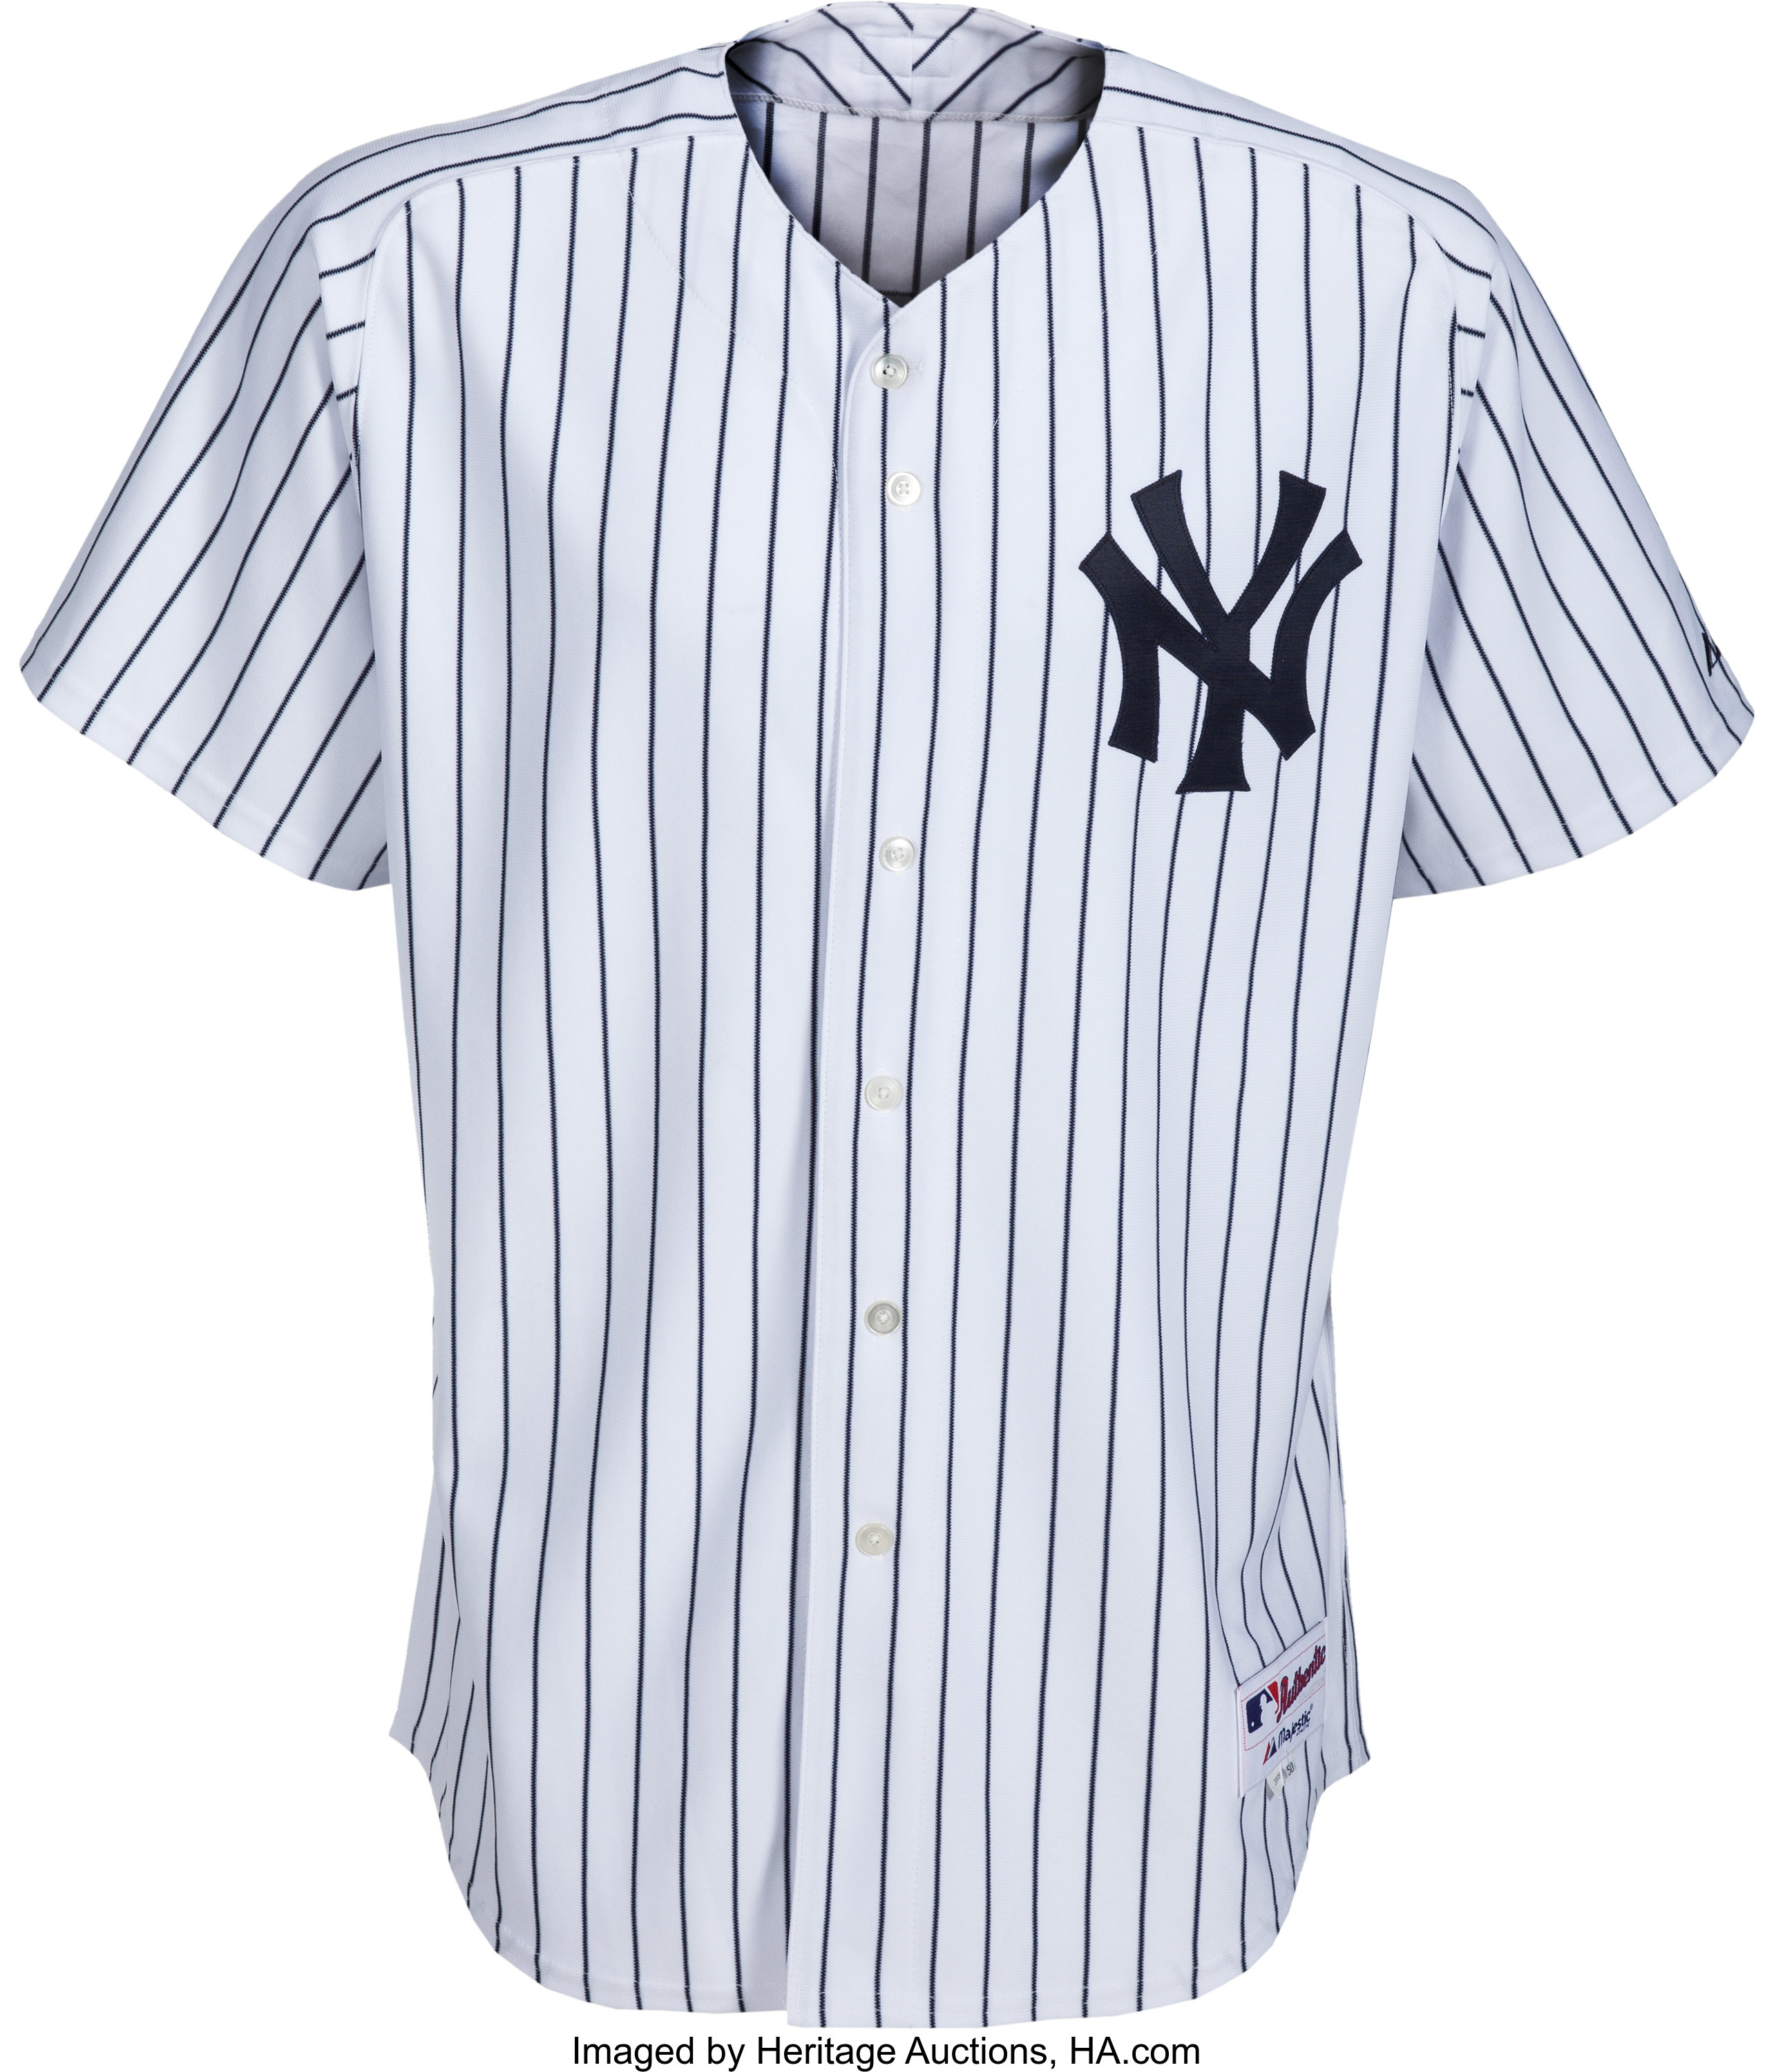 2008 Bobby Murcer New York Yankees Old-Timers' Day Jersey from The